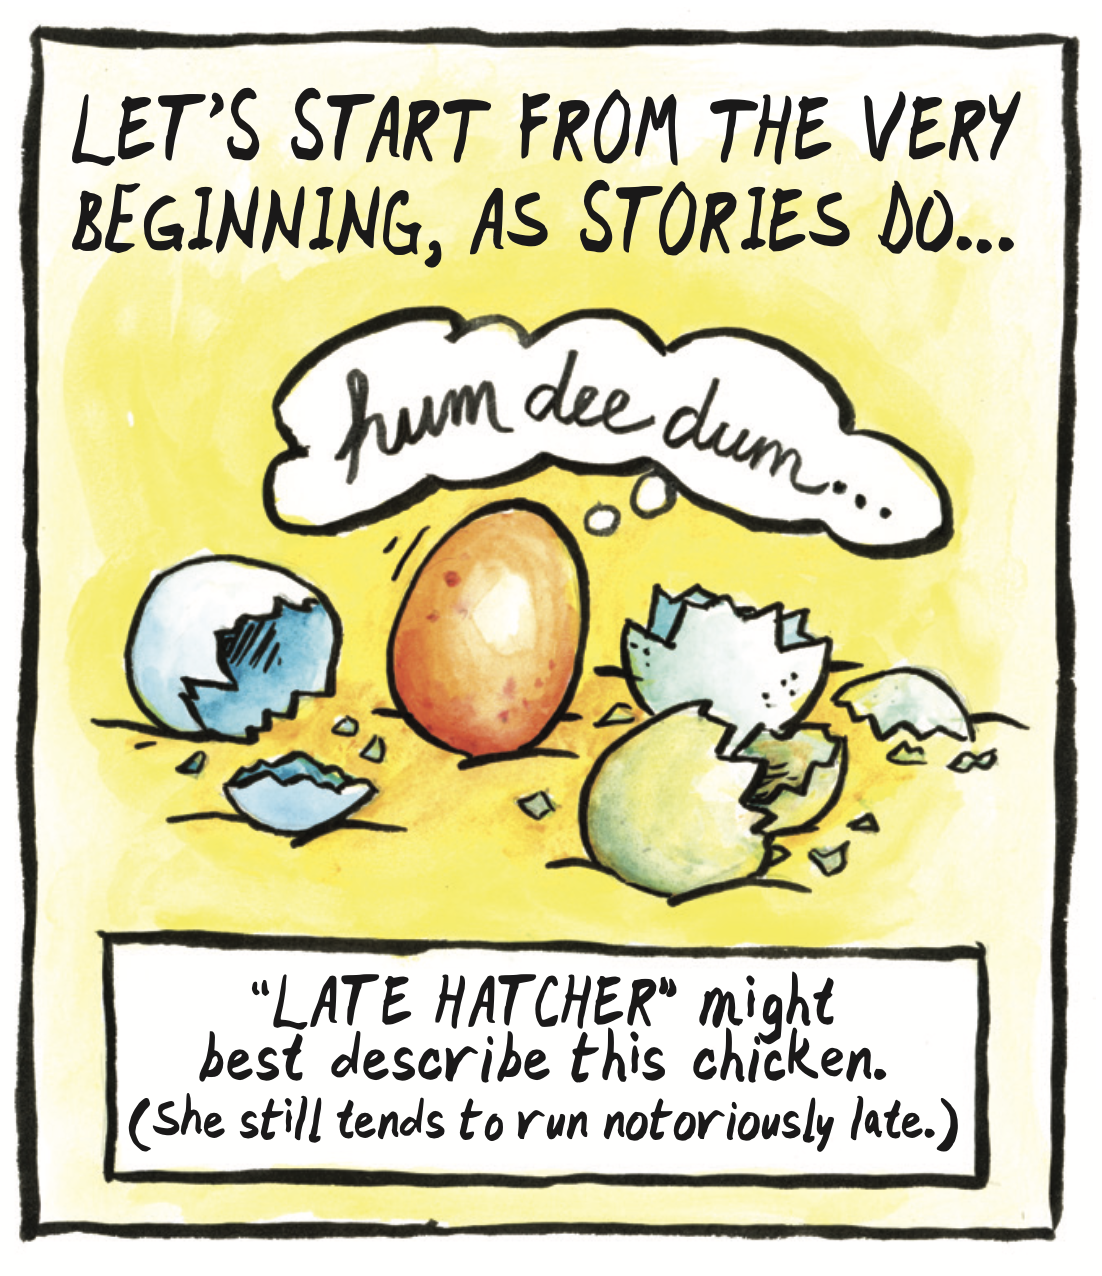 â€œLetâ€™s start from the very beginning, as stories doâ€¦ â€˜Late hatcherâ€™ might best describe this chicken. (She still tends to run notoriously late.)â€ An intact egg sits next to broken eggs shells thinking, â€œhum dee dumâ€¦â€